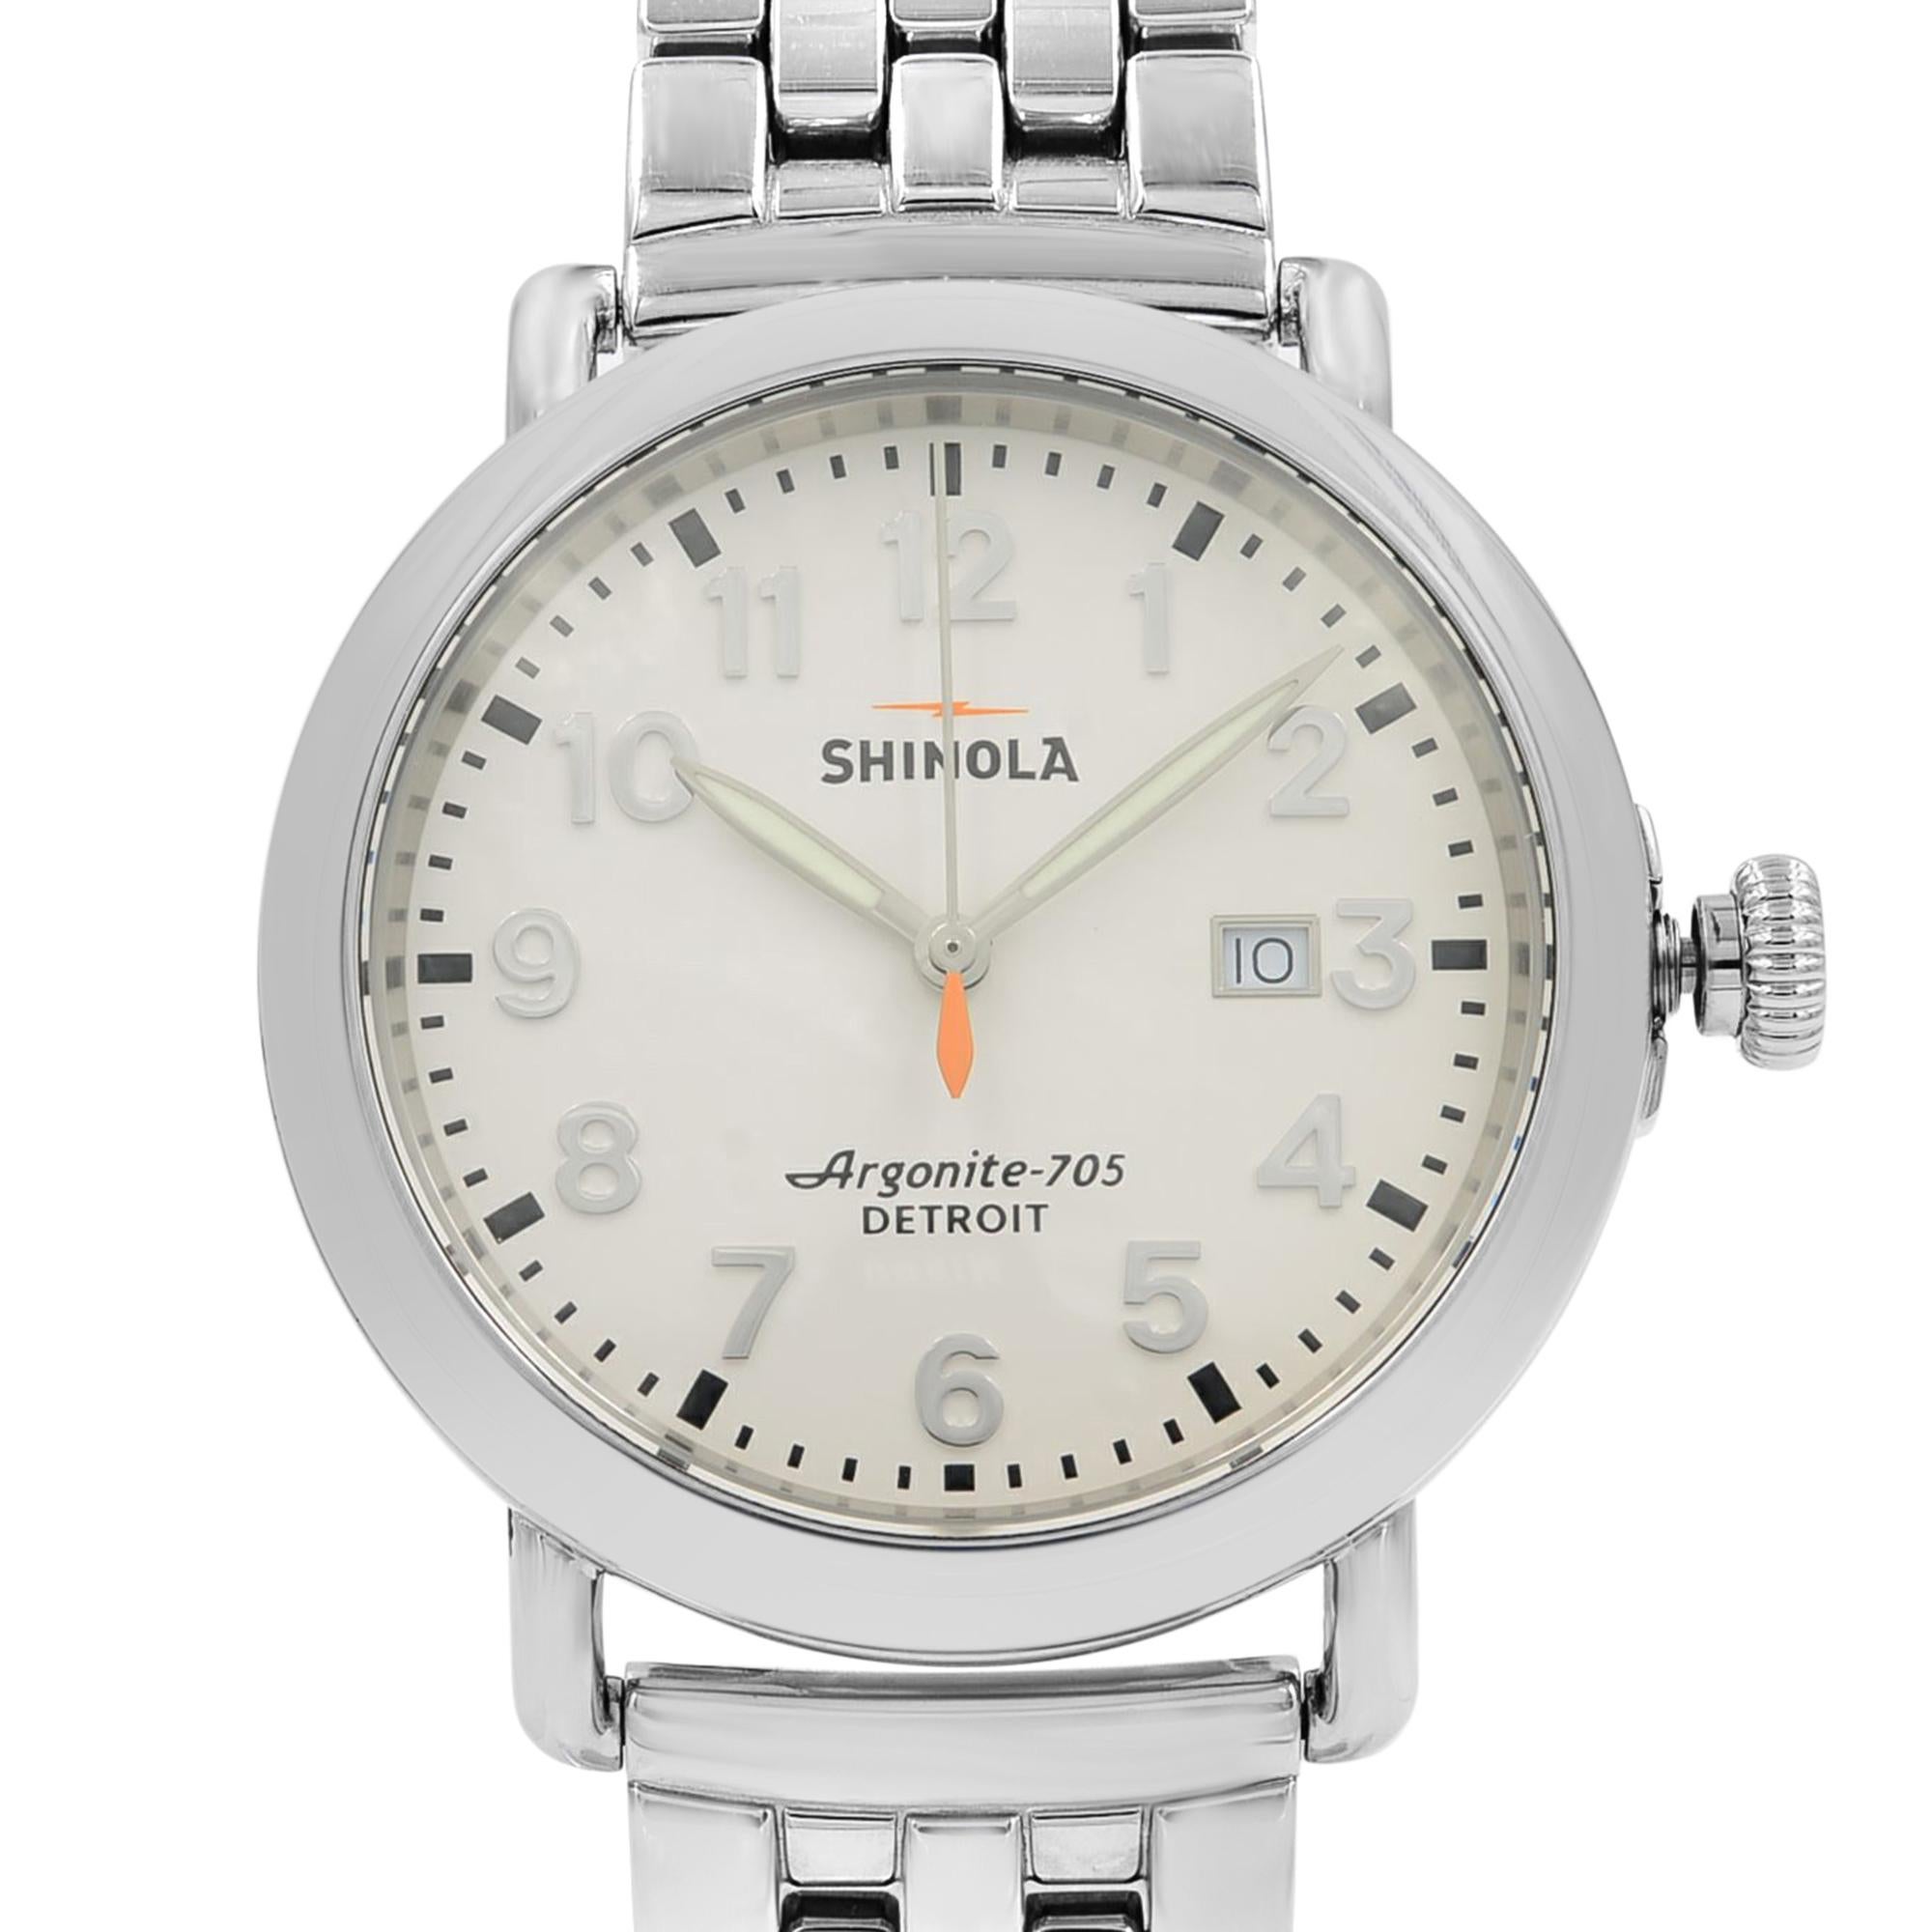 Pre-Owned Shinola Runwell 10000054 is a beautiful men's timepiece that is powered by quartz (battery) movement which is cased in a stainless steel case. It has a round shape face, date indicator dial and has hand arabic numerals style markers. It is